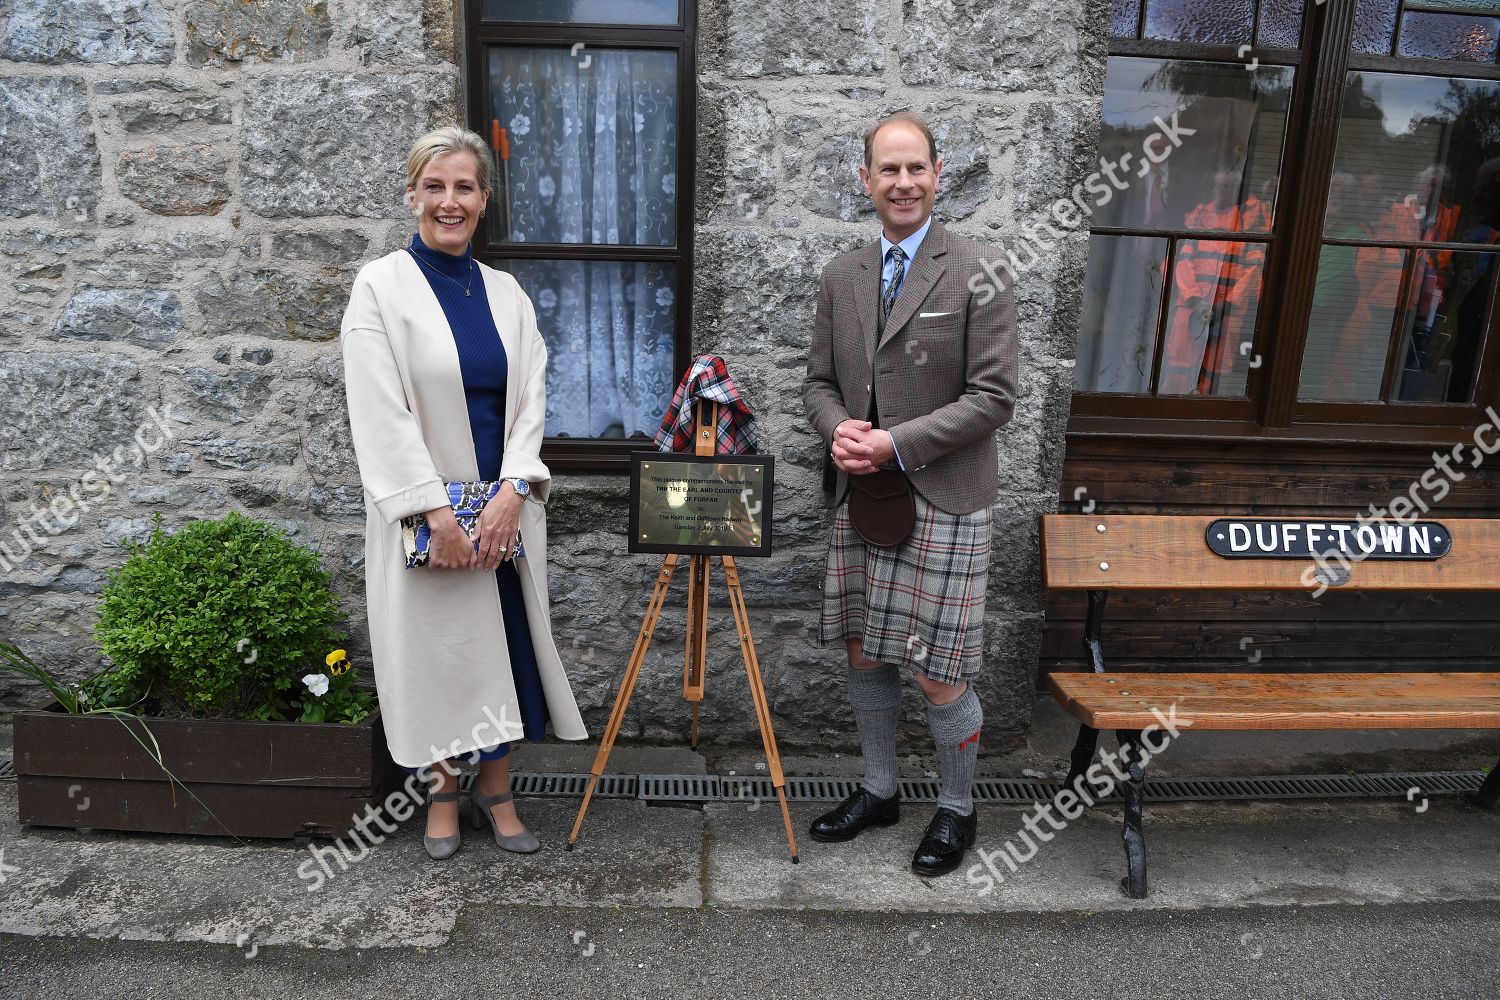 sophie-countess-of-wessex-and-prince-edward-visit-to-scotland-uk-shutterstock-editorial-10326116cc.jpg